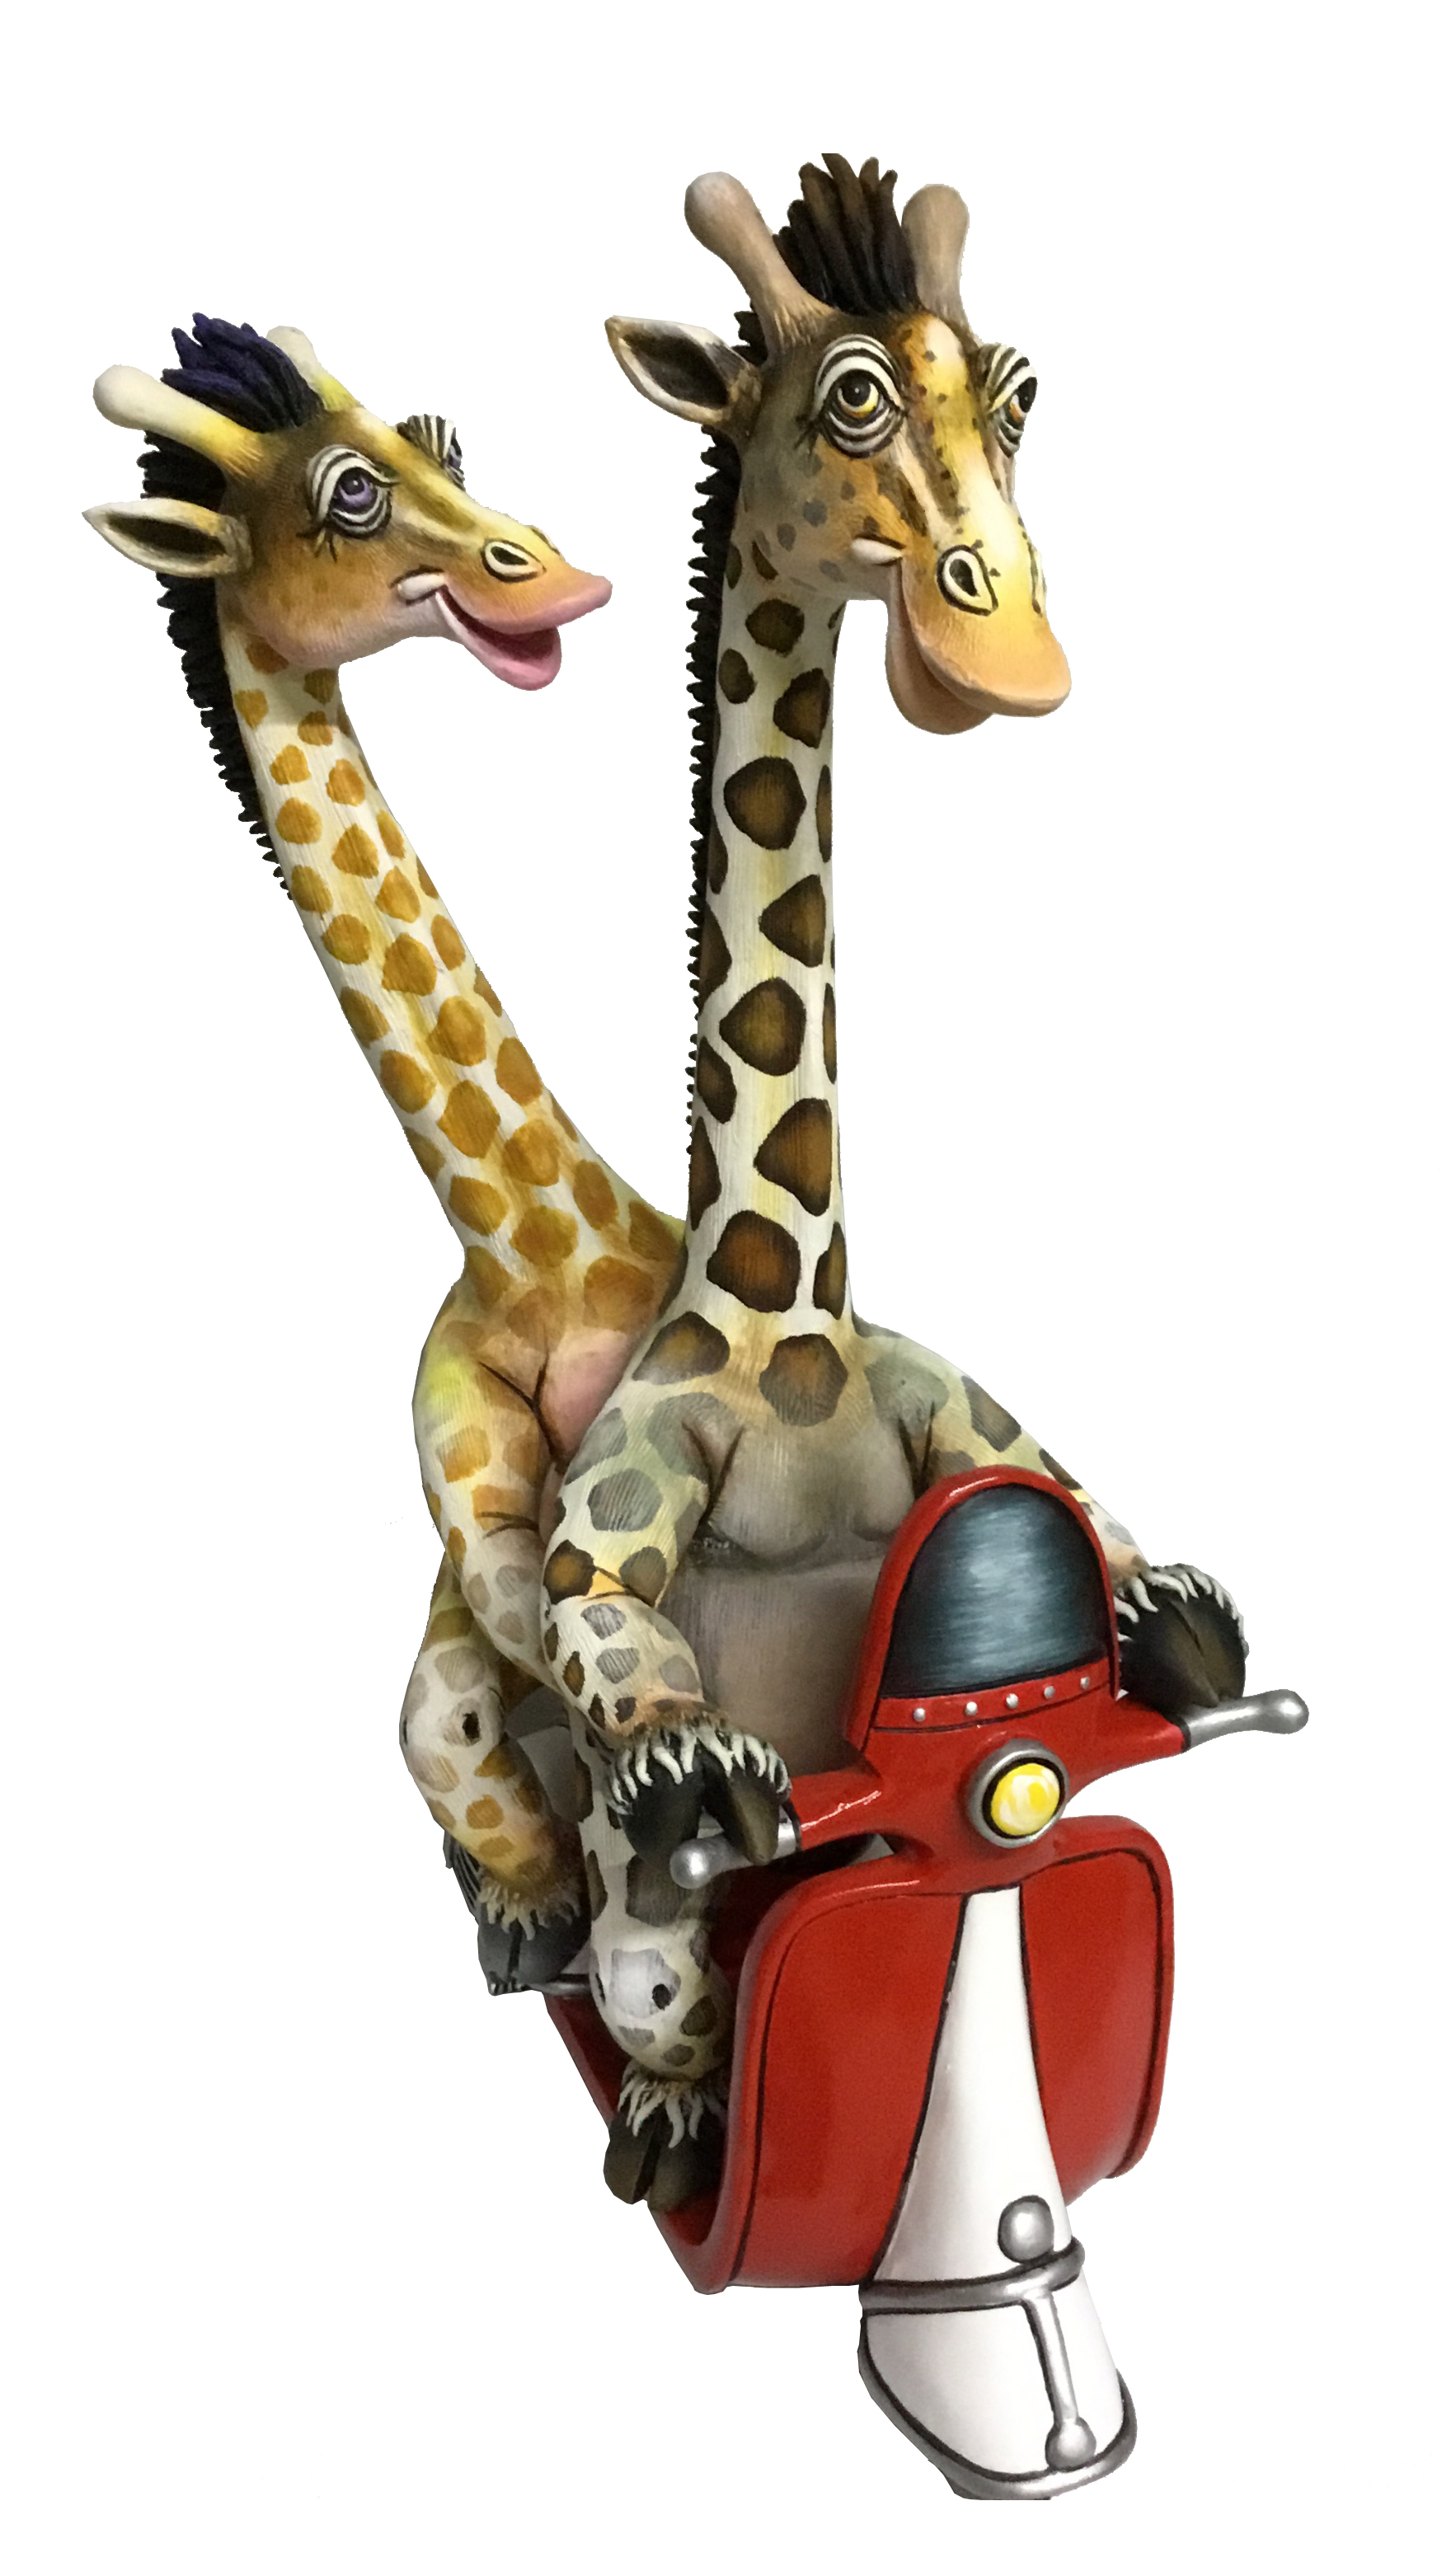 Signed, limited edition giraffe sculpture